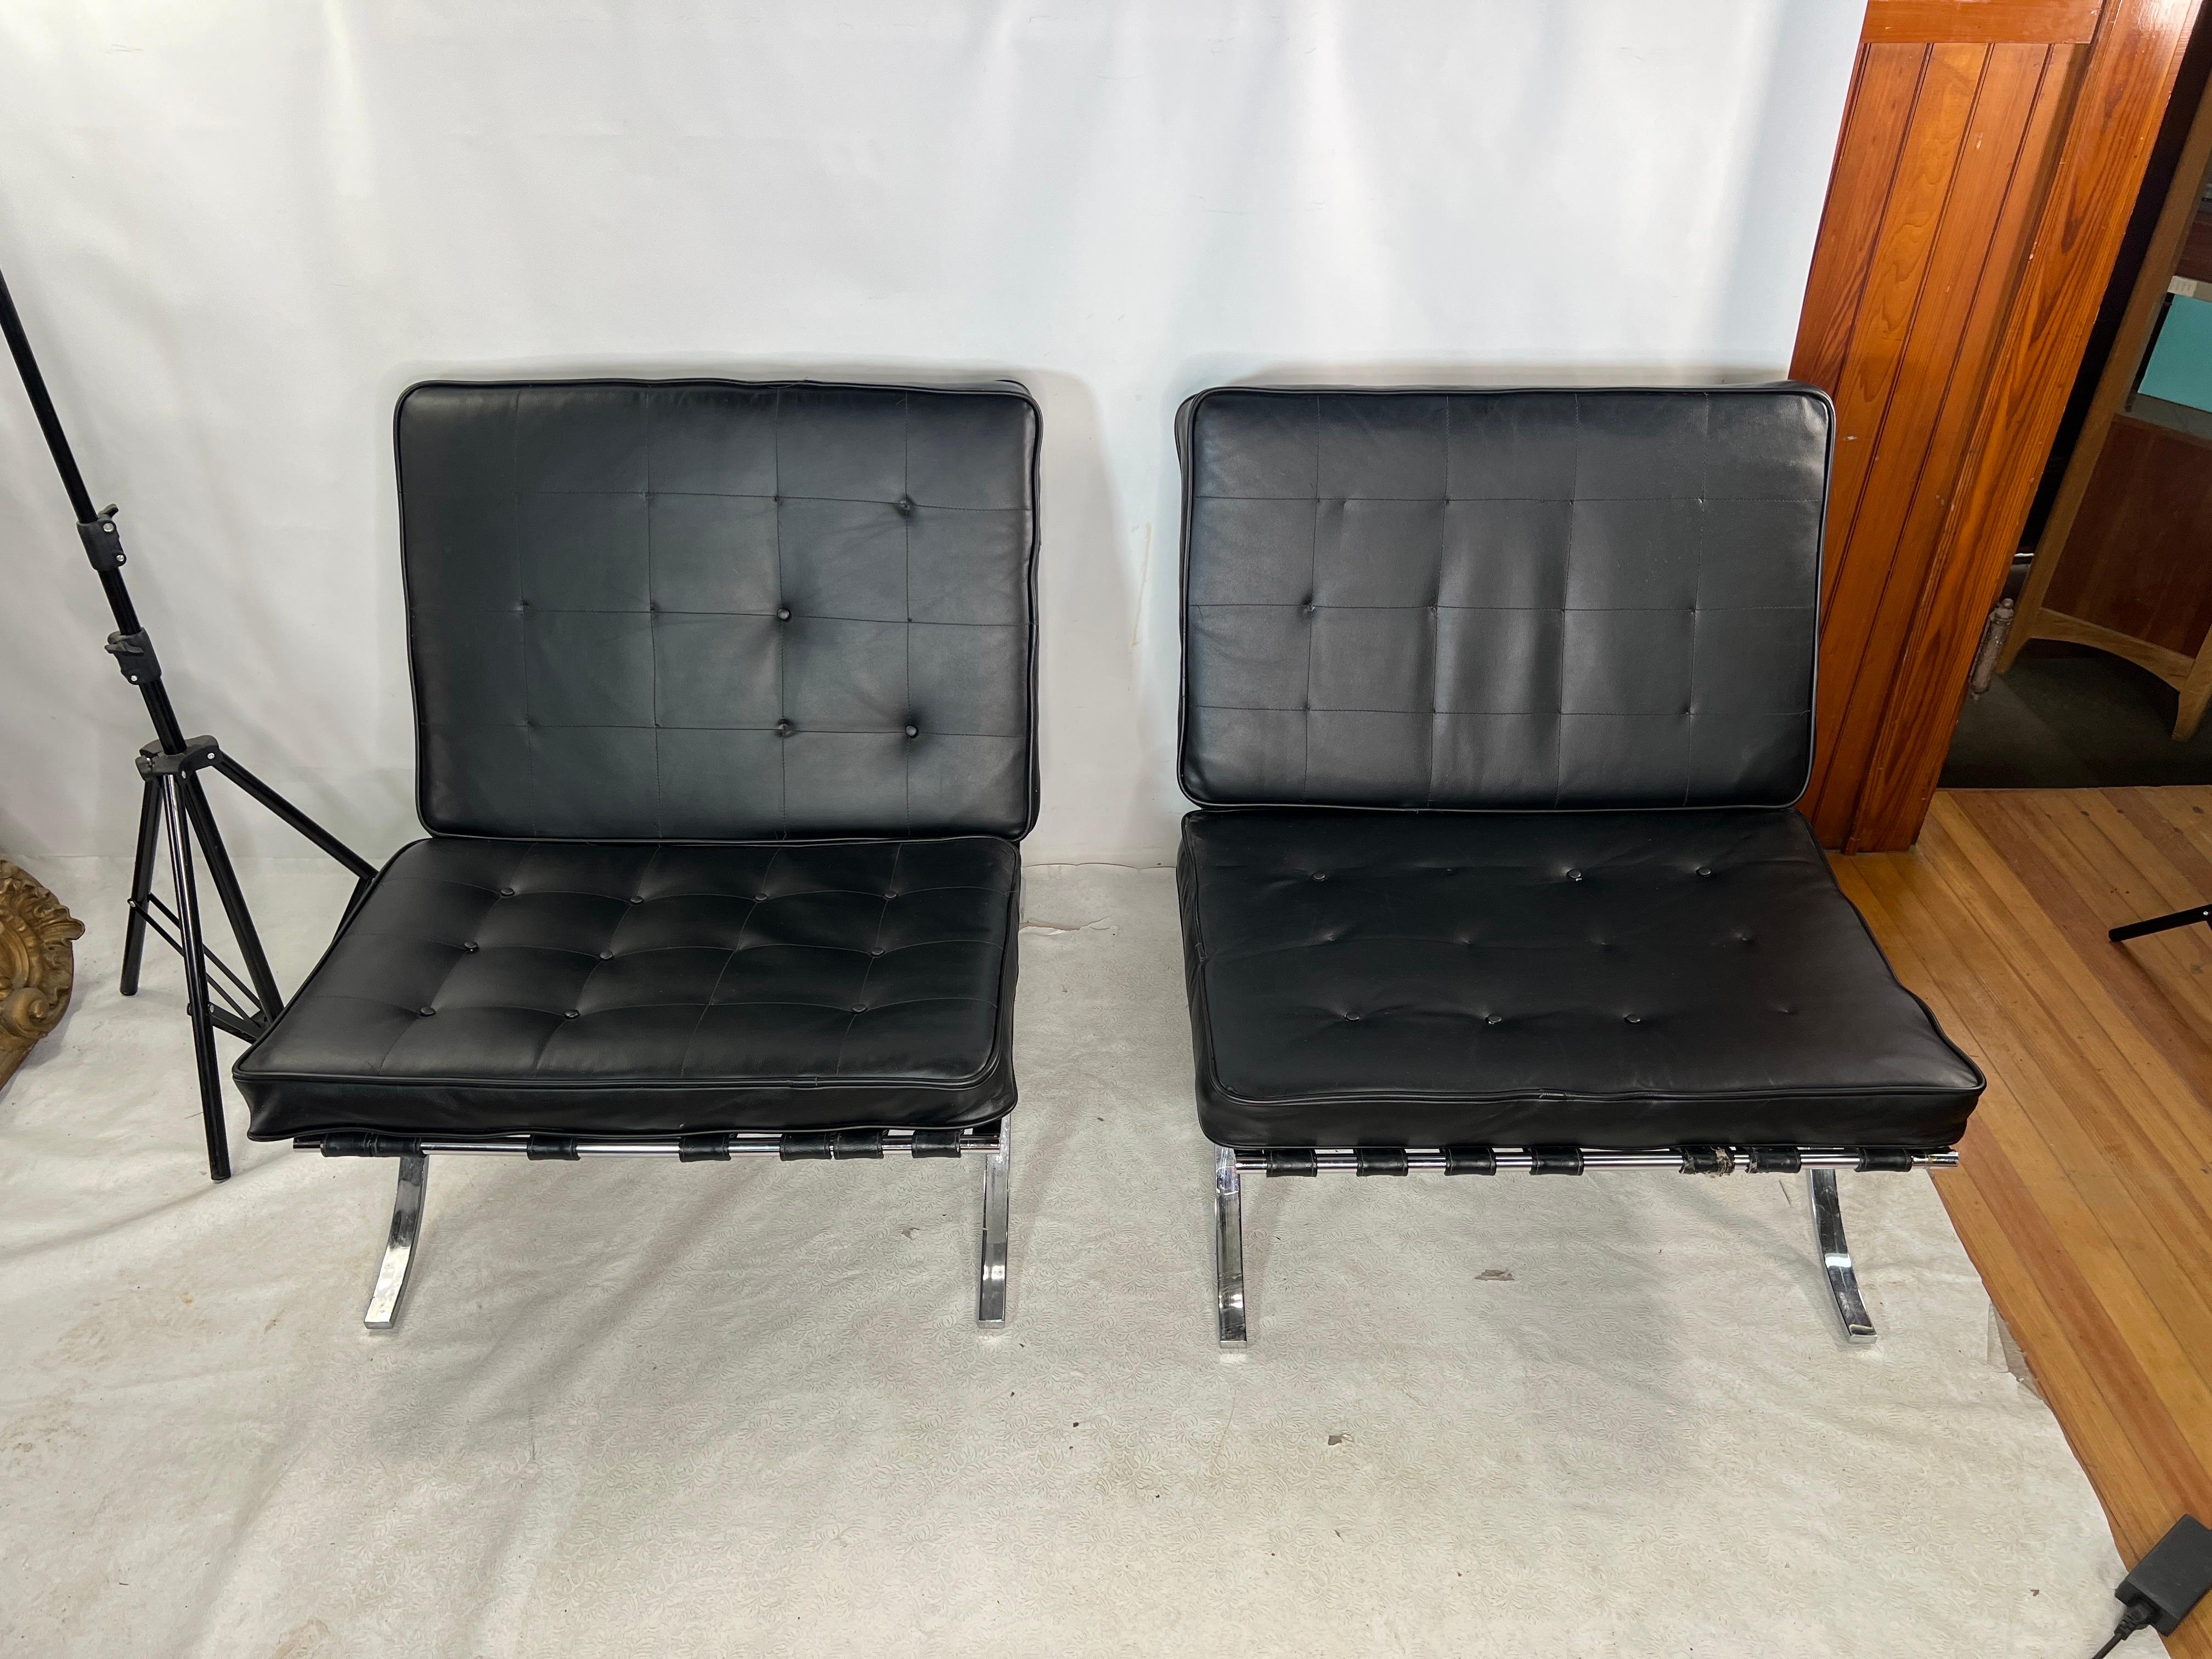 This nice pair of lounge chairs that are made by Selig. The chair cushions are leather and are missing buttons.